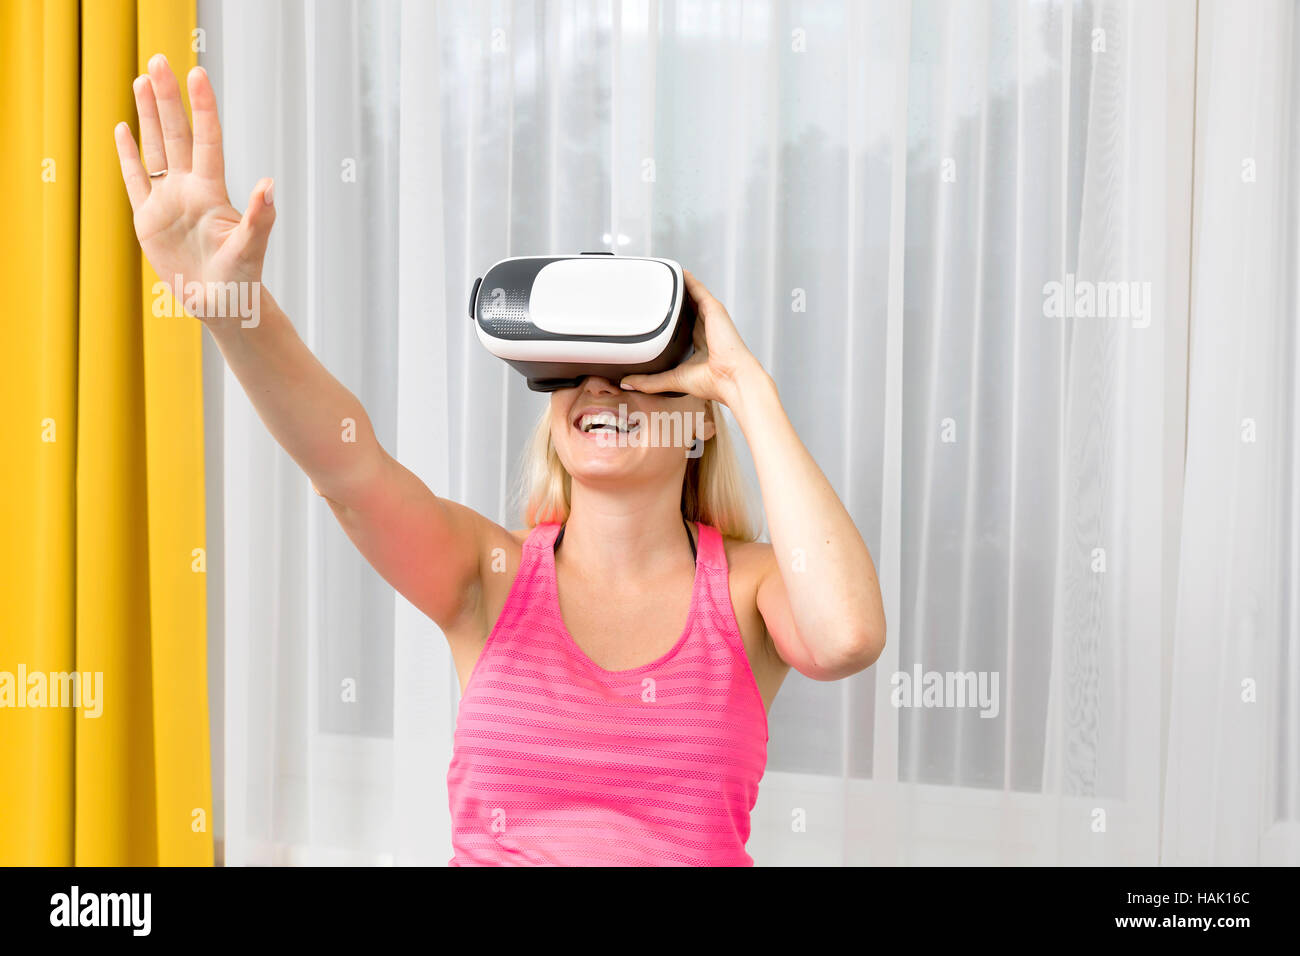 woman playing game in virtual reality glasses Stock Photo